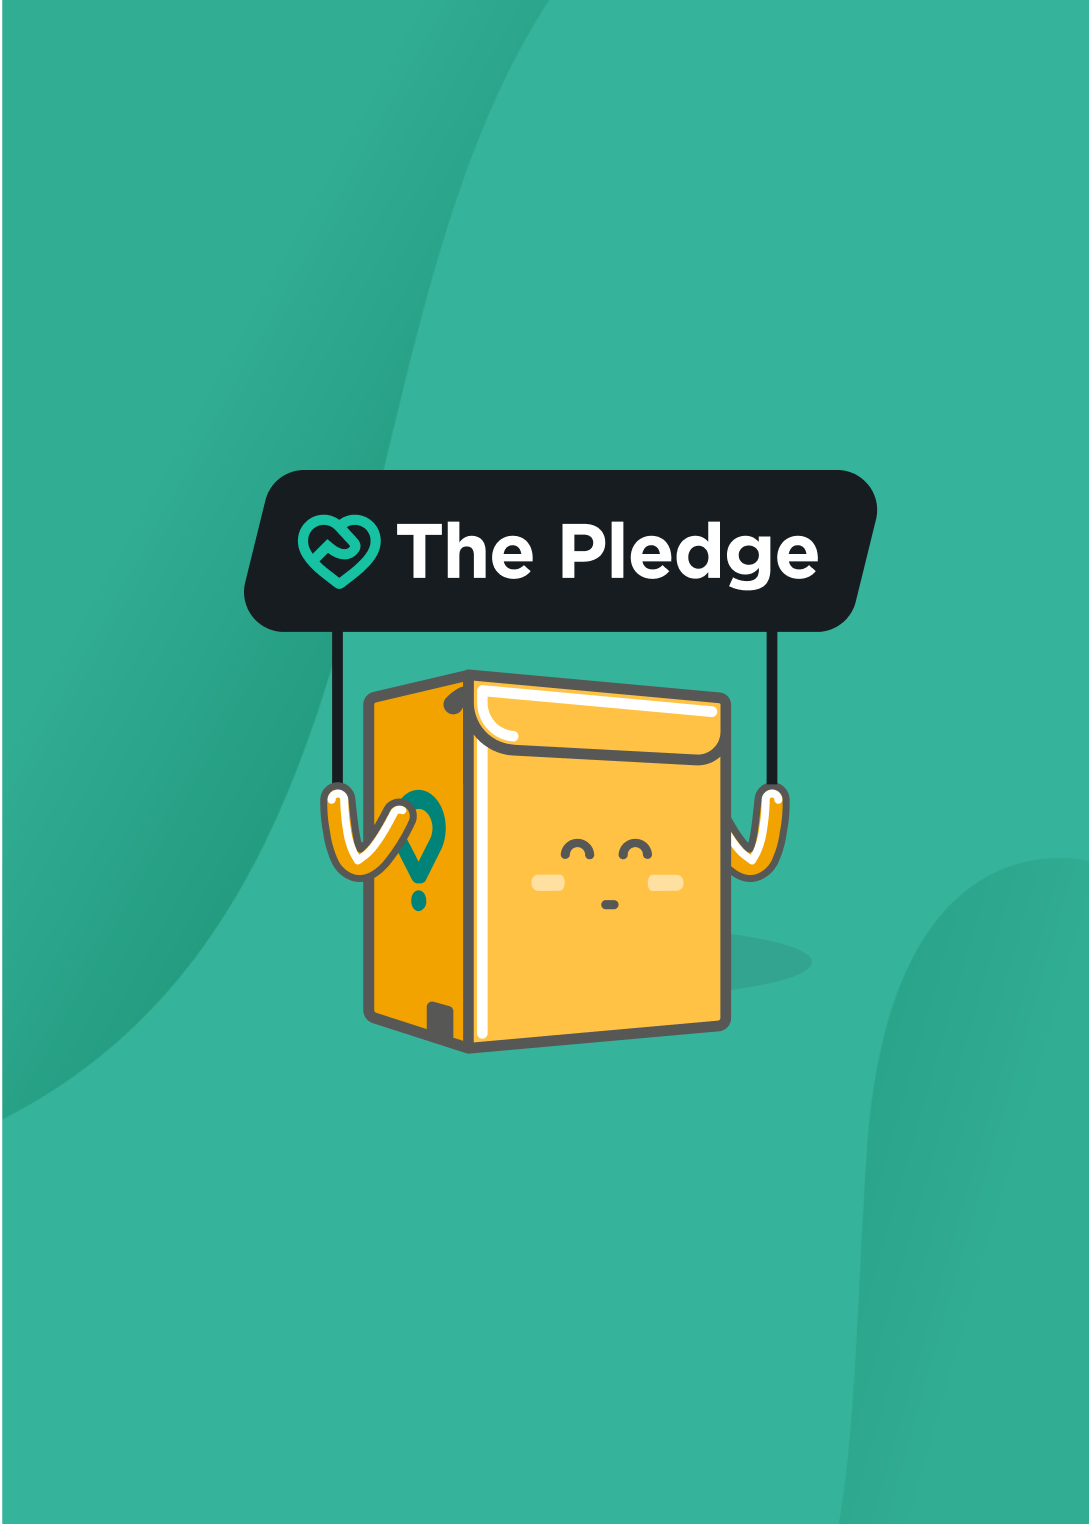 What is Pledge?